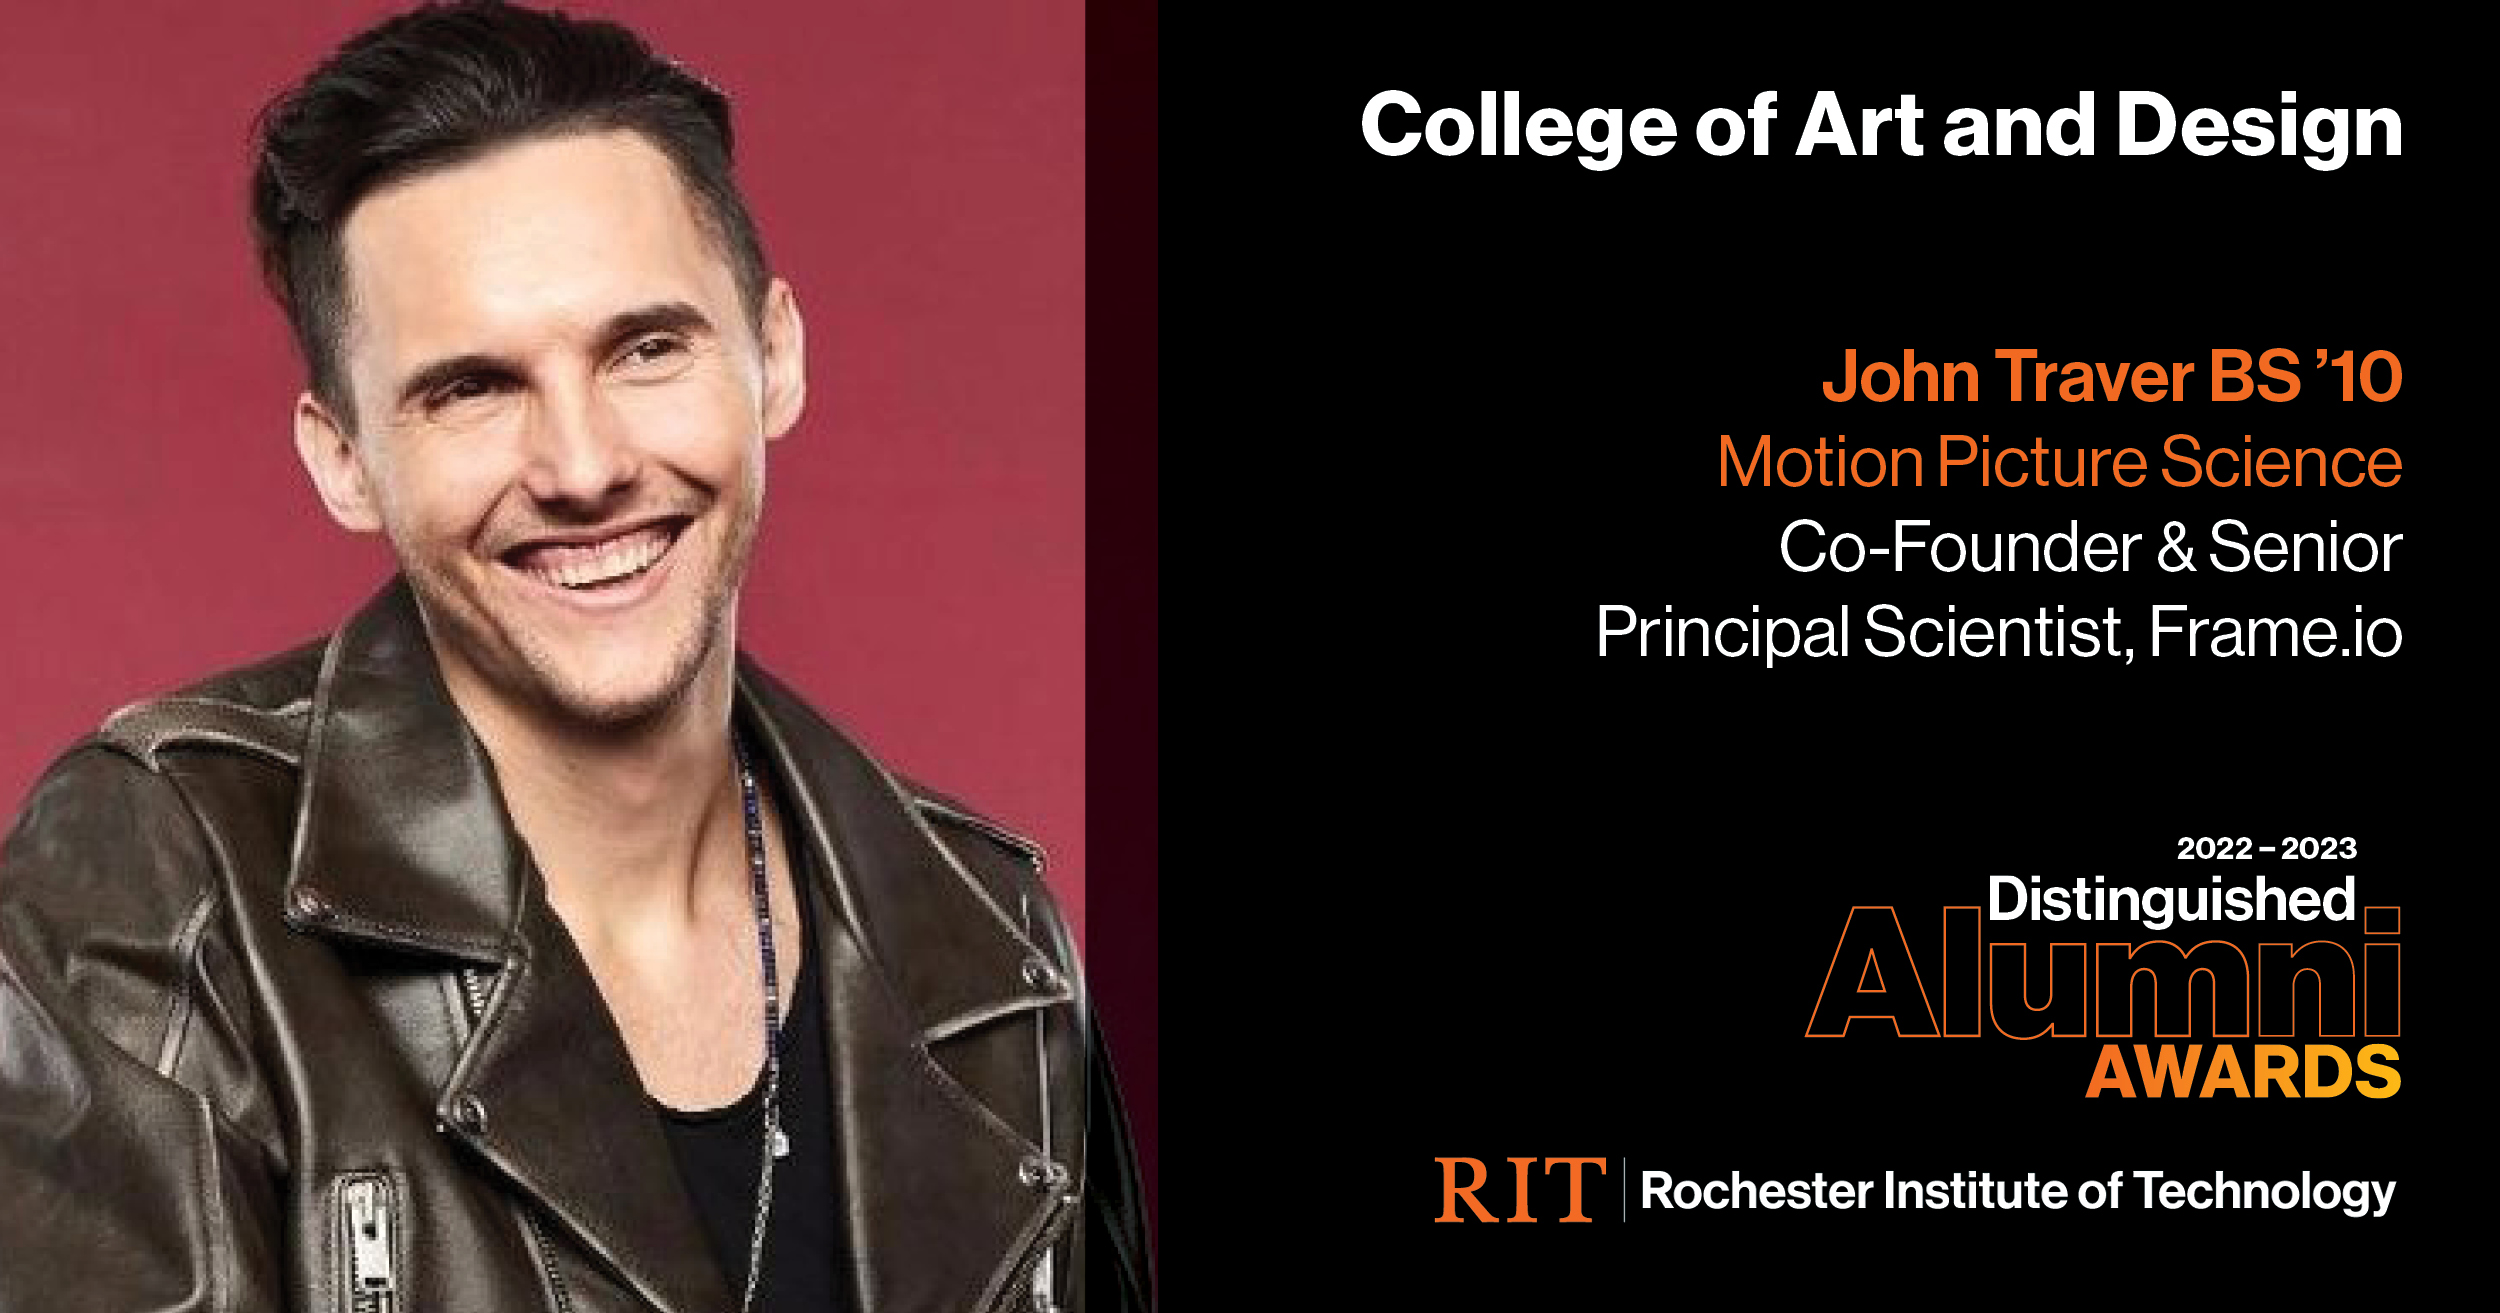 Image on Left: Head shot John Traver  Text on RIght: College of Art and Design John Traver BS'10 Motion Picture Science, Co-Founder & Senior Principal Scientist, Frame.io 2022-2023 Alumni Awards RIT | Rochester Institute of Technology